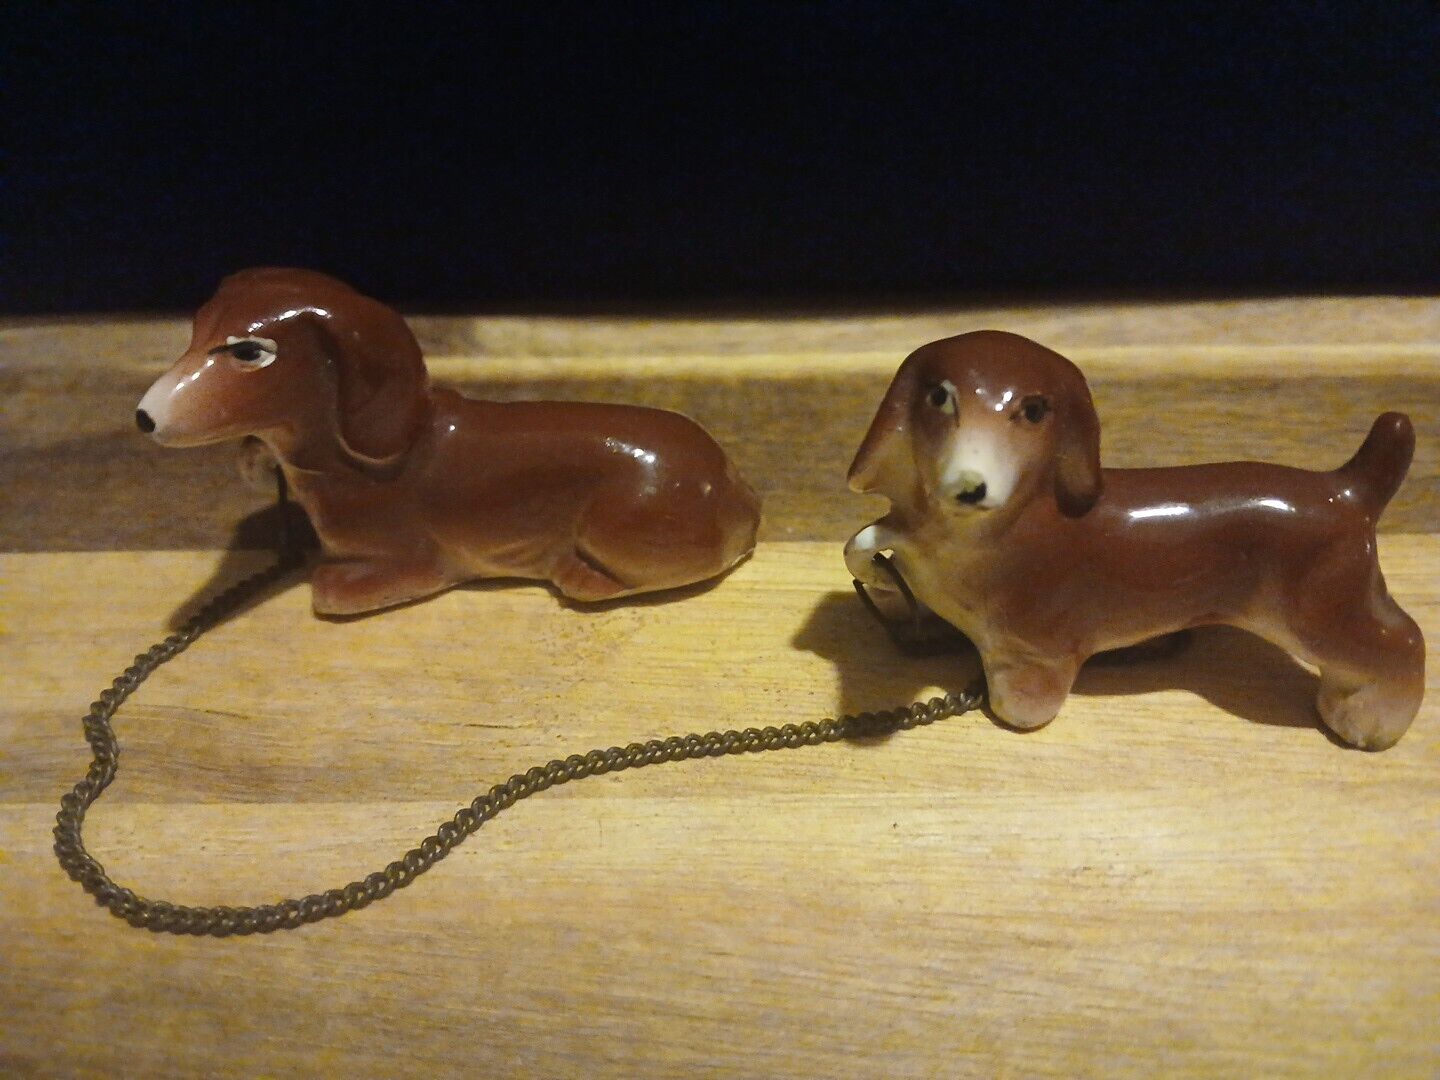 VTG Vintage Ceramic Set Of 2 Datsunds Chained Together By Delicate Chain